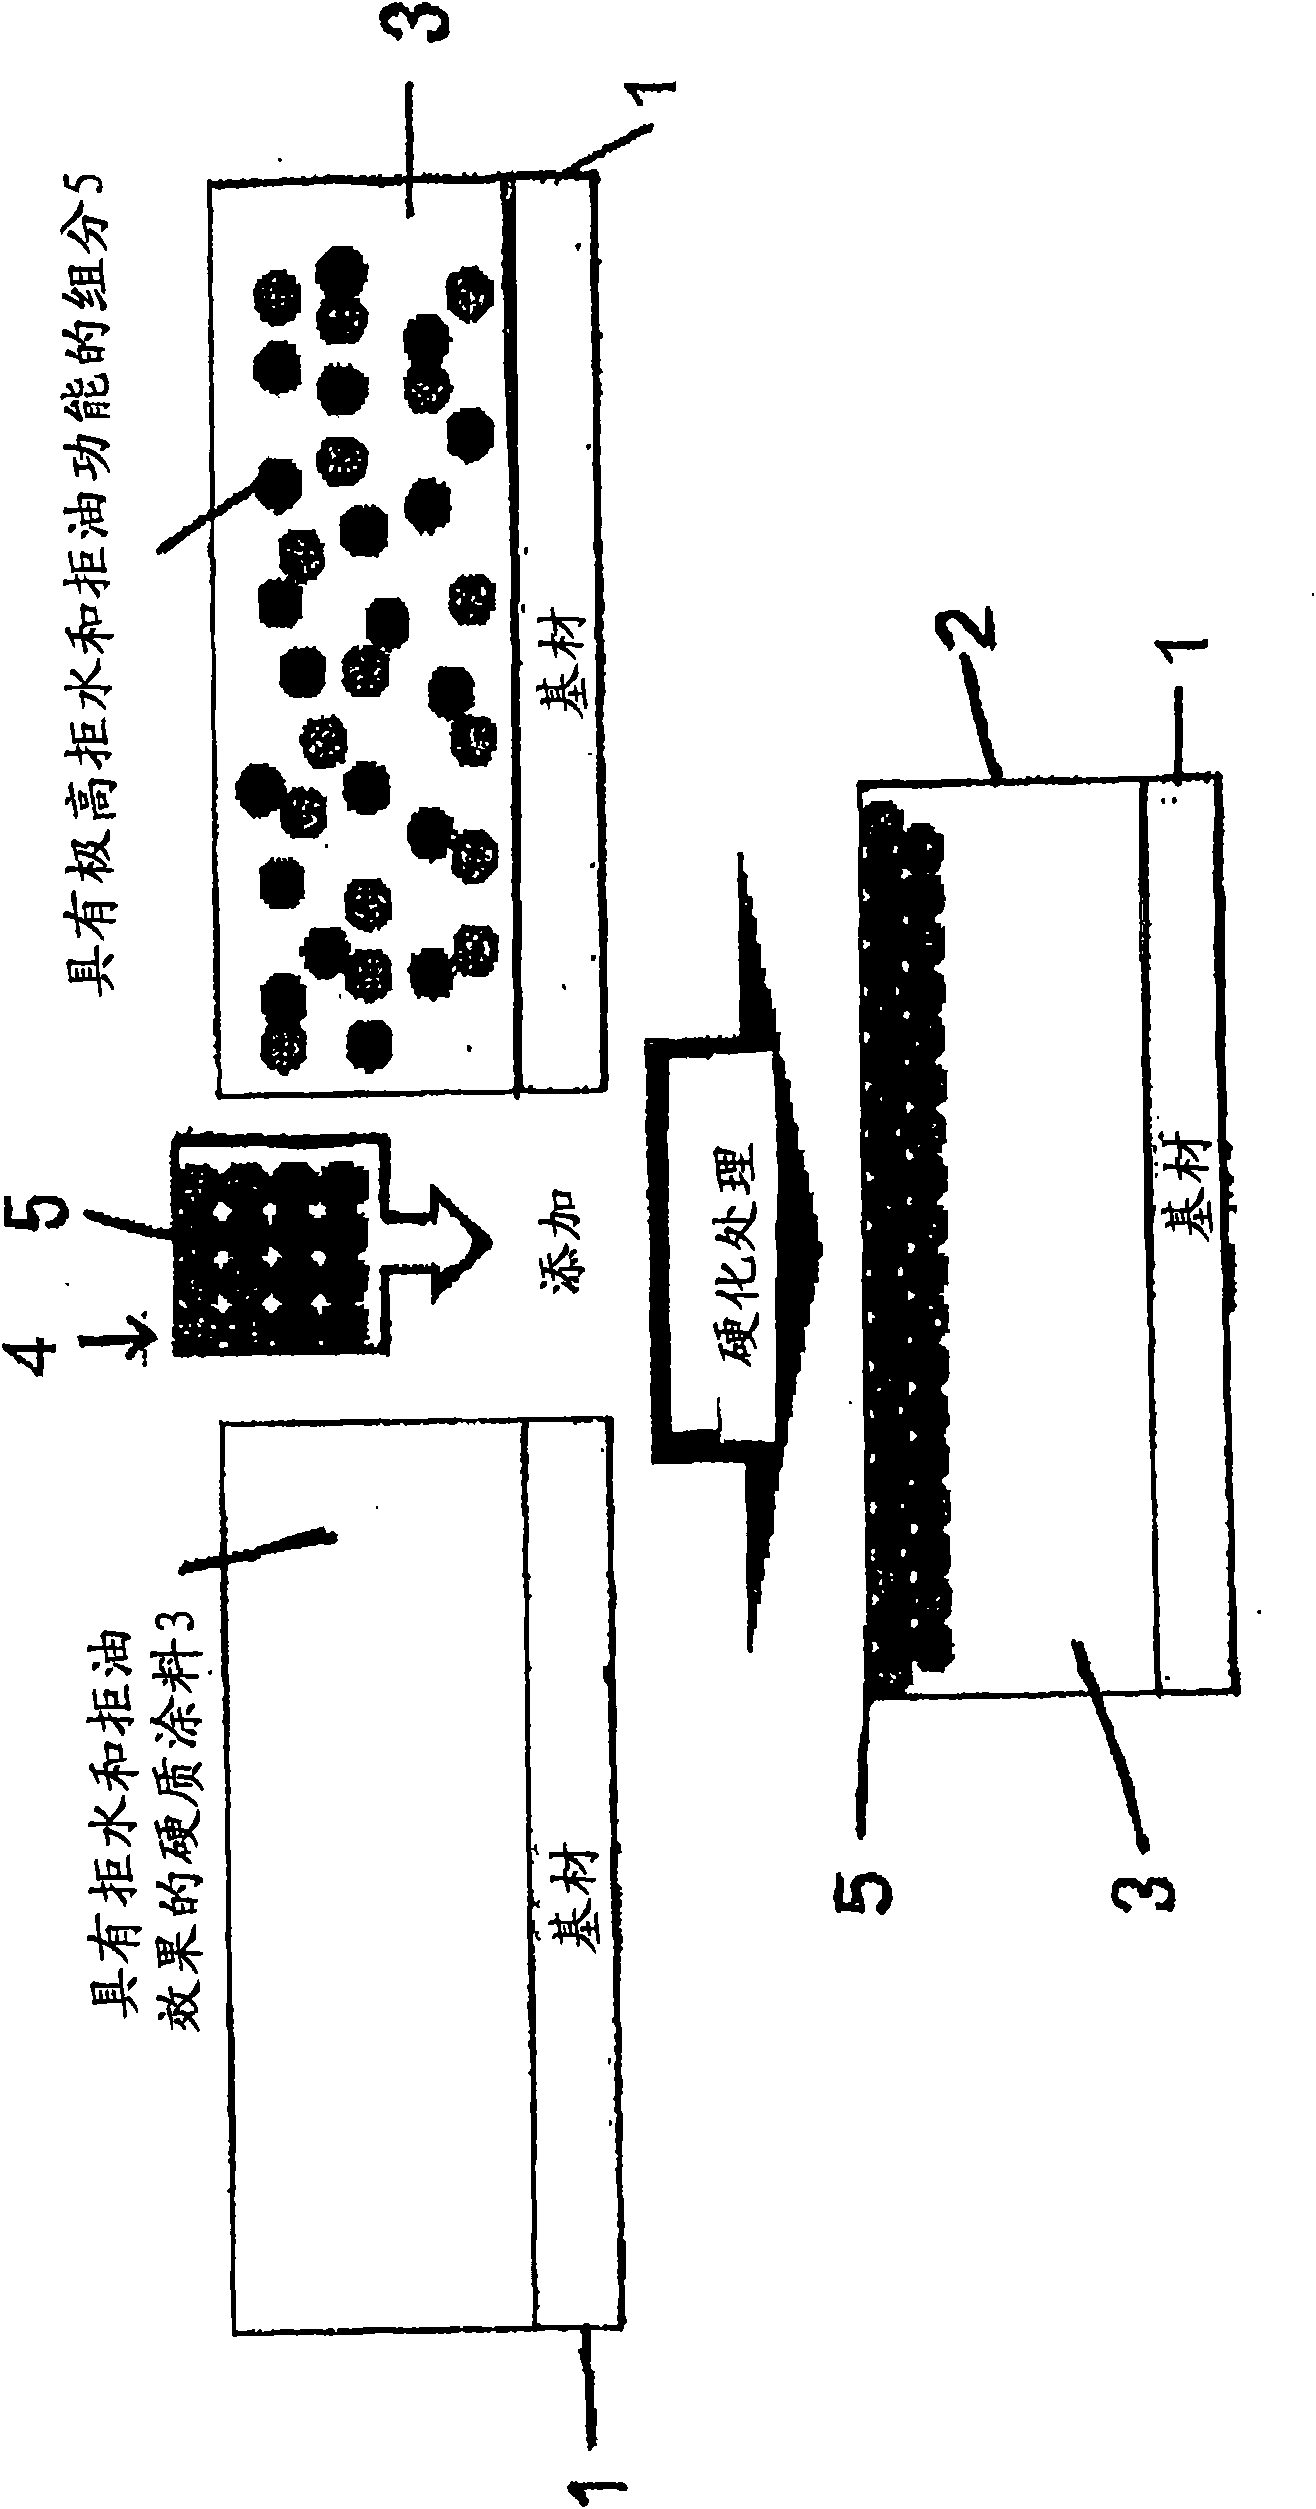 Coating liquid capable of reducing fingerprint adhesion, manufacturing method thereof, and products coated with the coating liquid